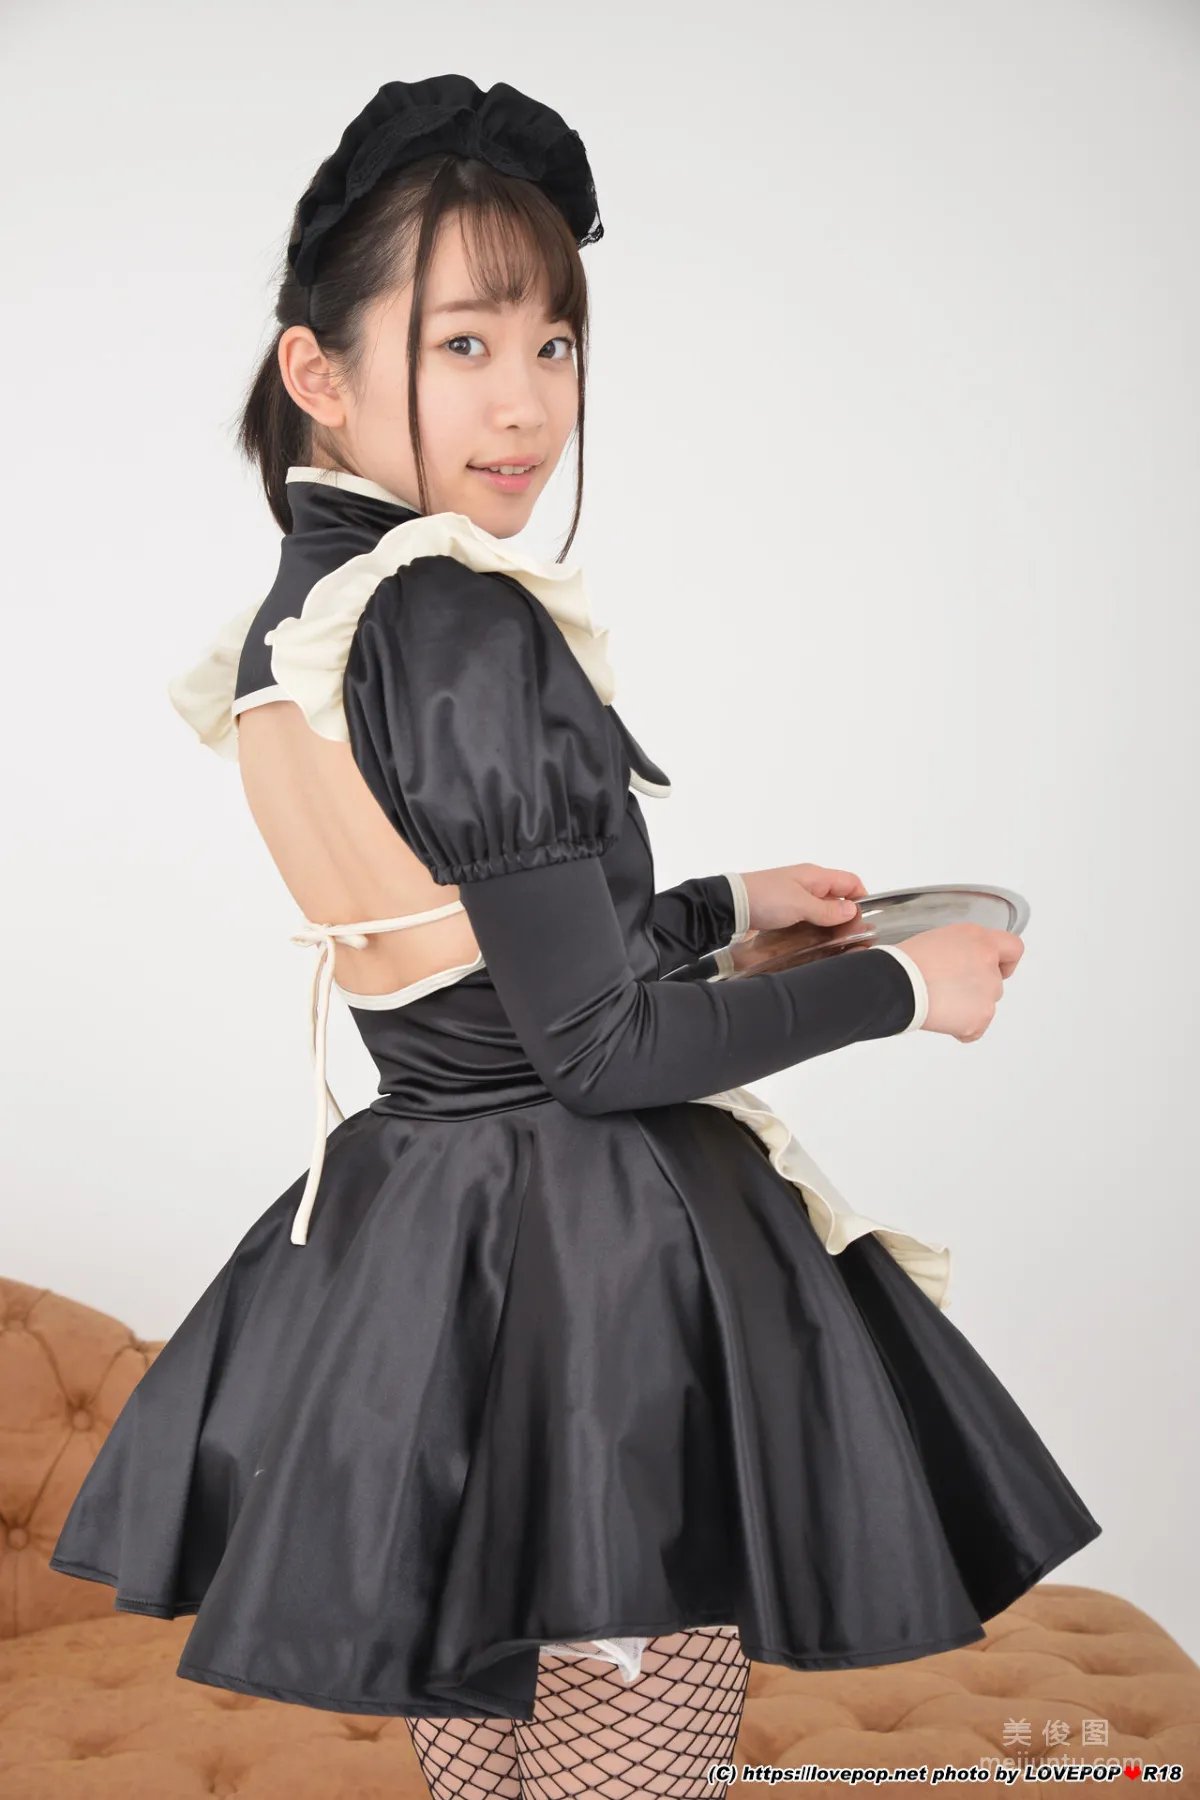 [LOVEPOP] Special Maid Collection - 架乃ゆら Photoset 028